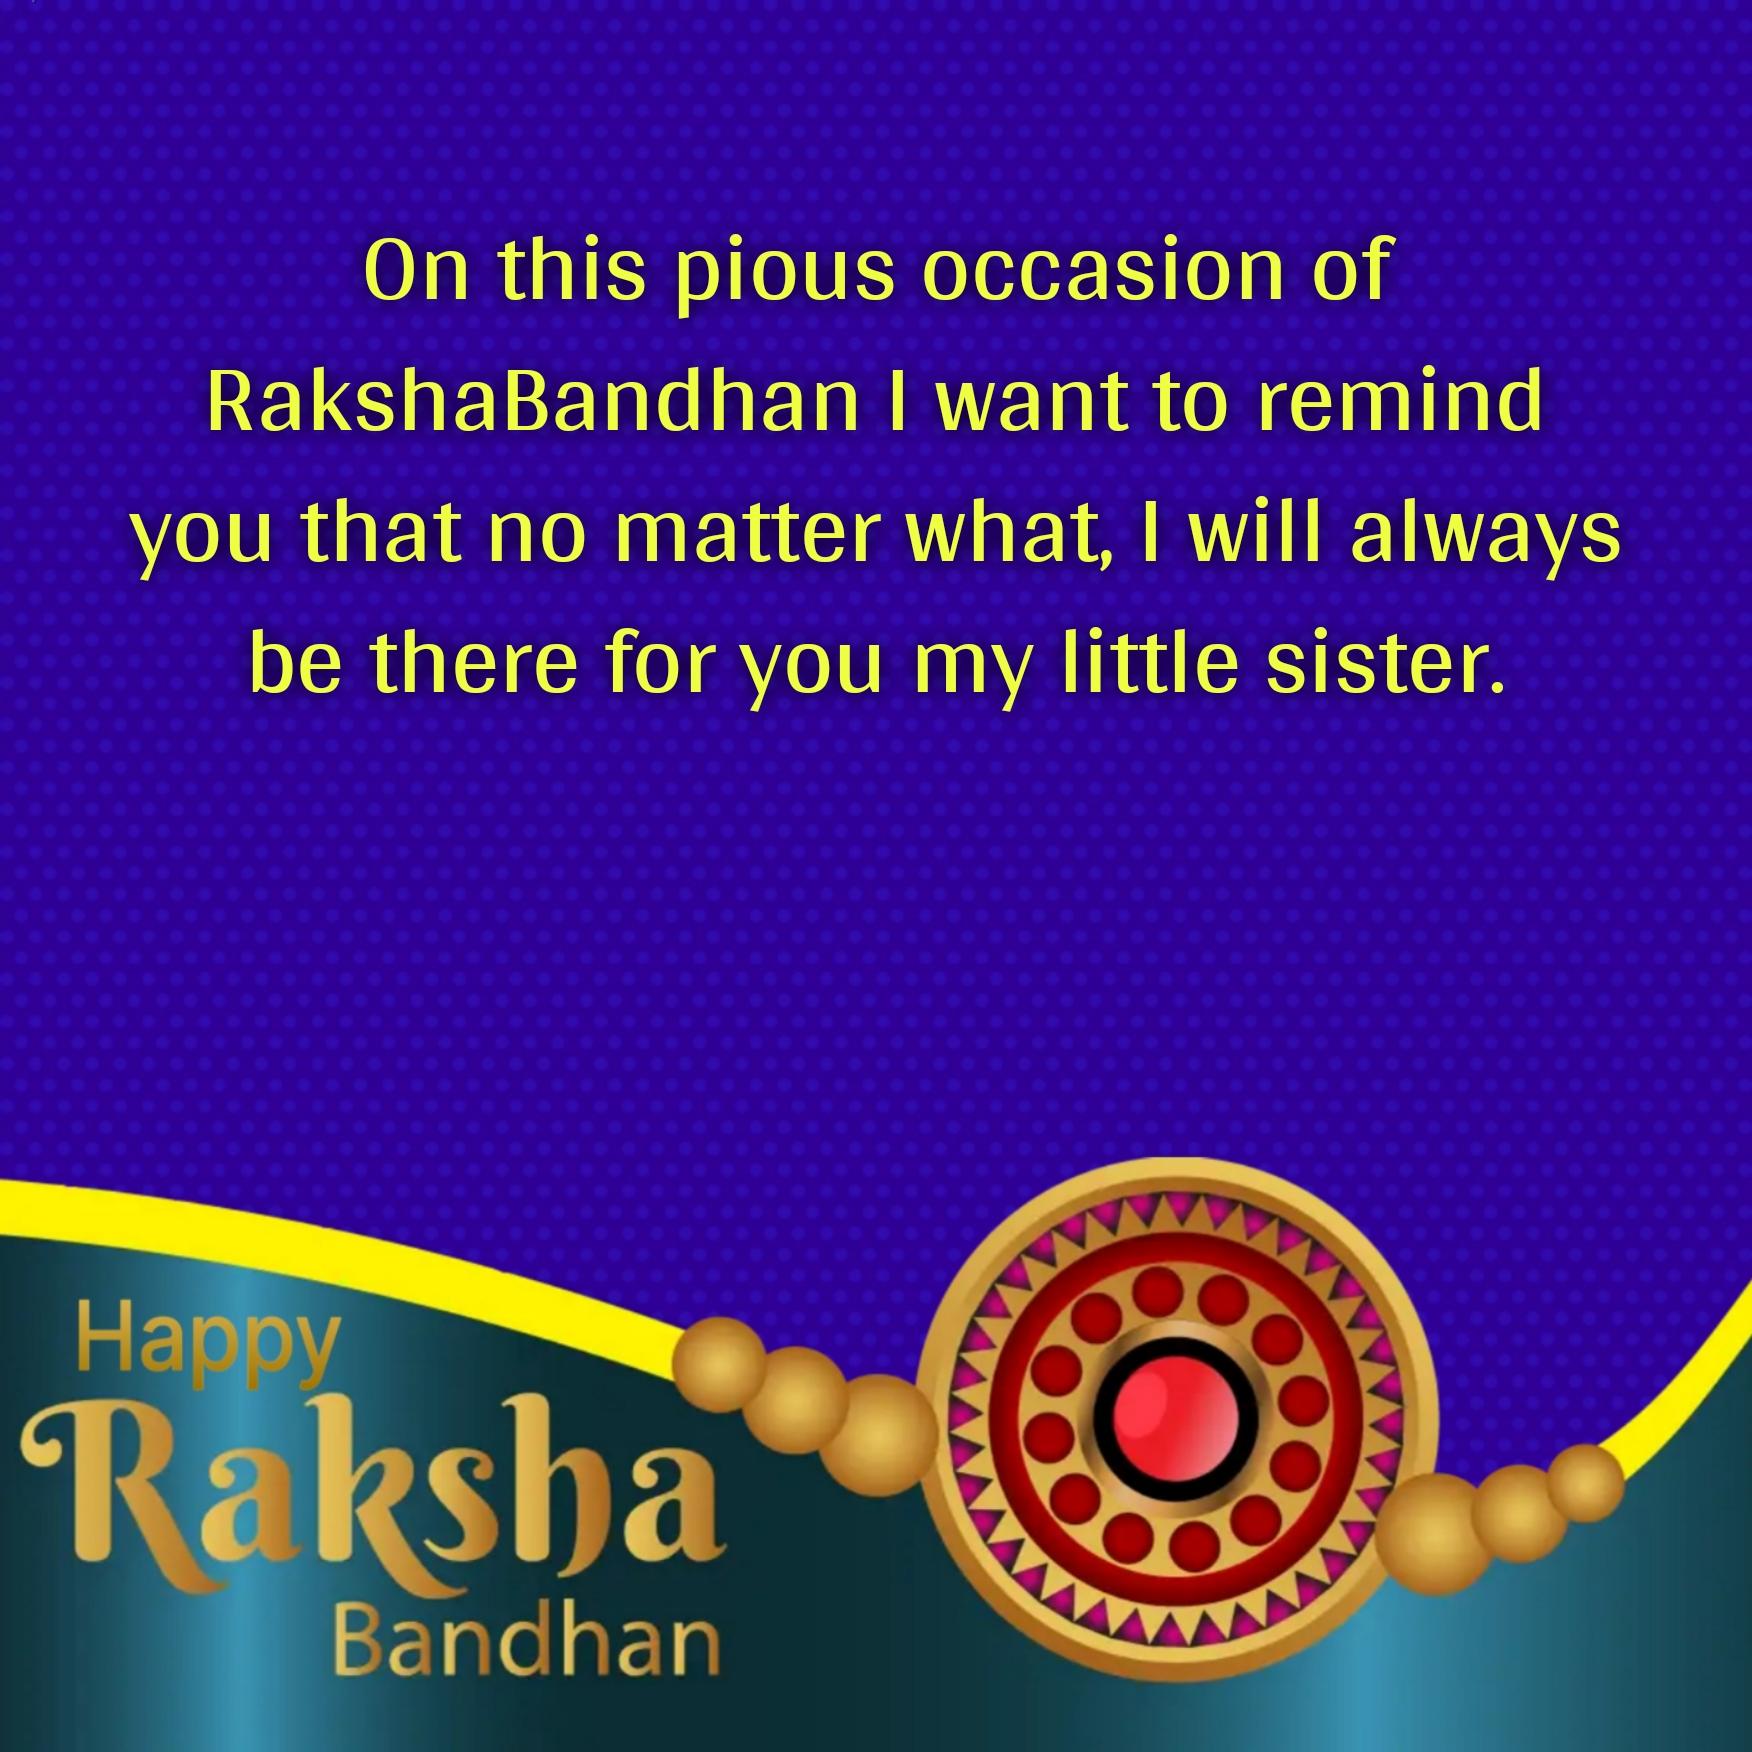 On this pious occasion of Rakshabandhan I want to remind